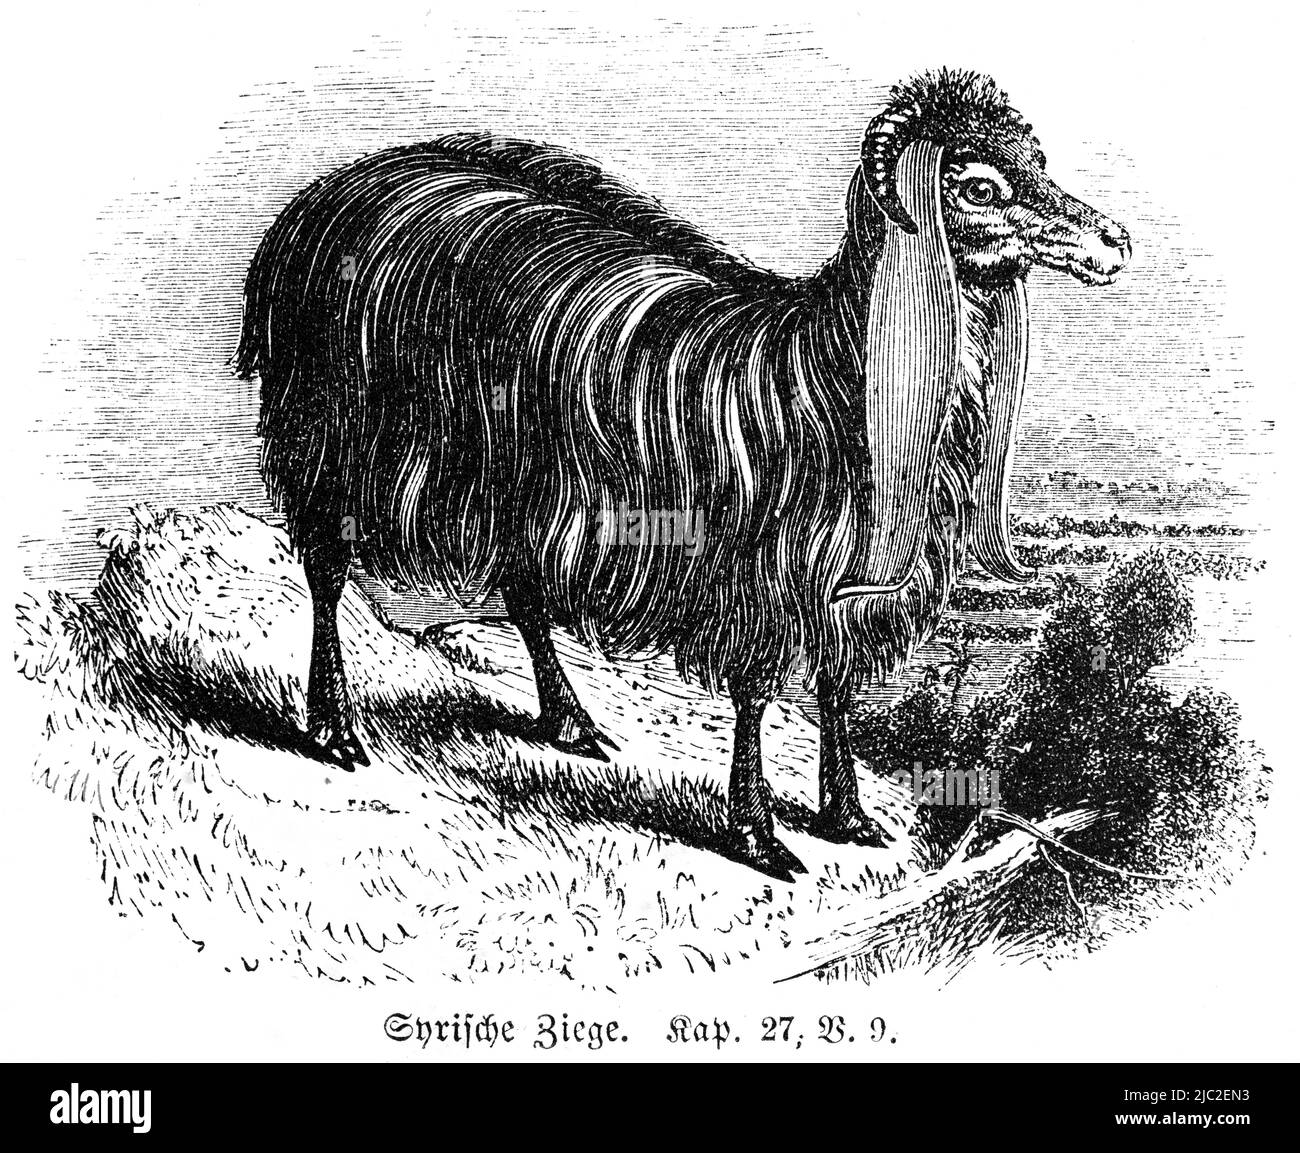 Syrian goat, Bible, Old Testament, First Book of Moses, Genesis, Chapter 27, Verse 9, historical Illustration 1850 Stock Photo